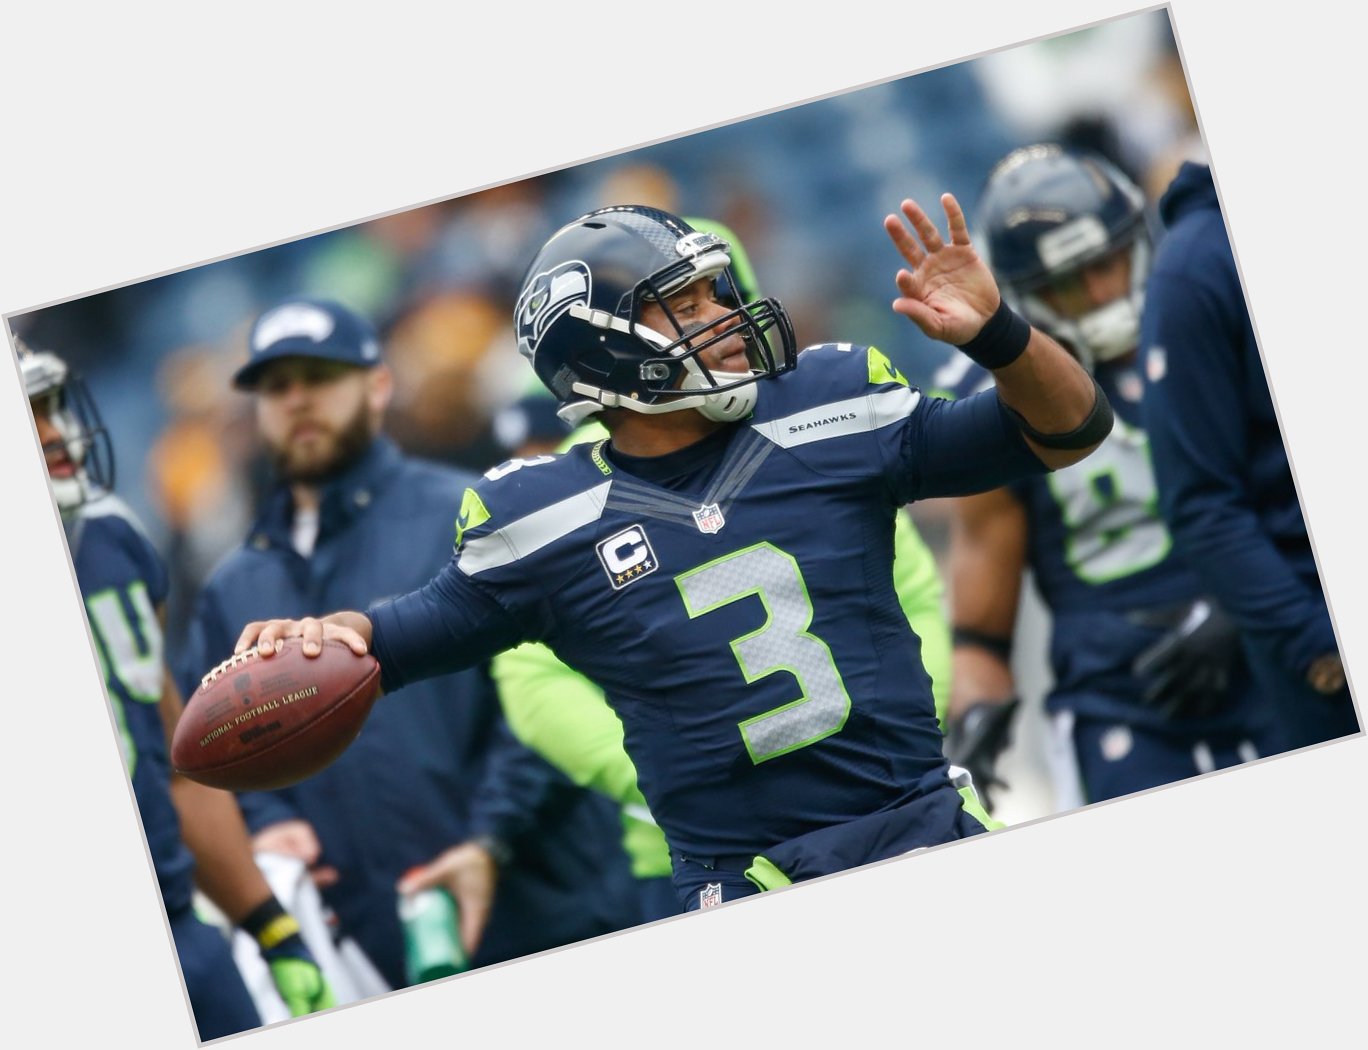 Happy BIRTHDAY  Russell Wilson is on   ! He throws his career-high 5th Pass TD of the day. 